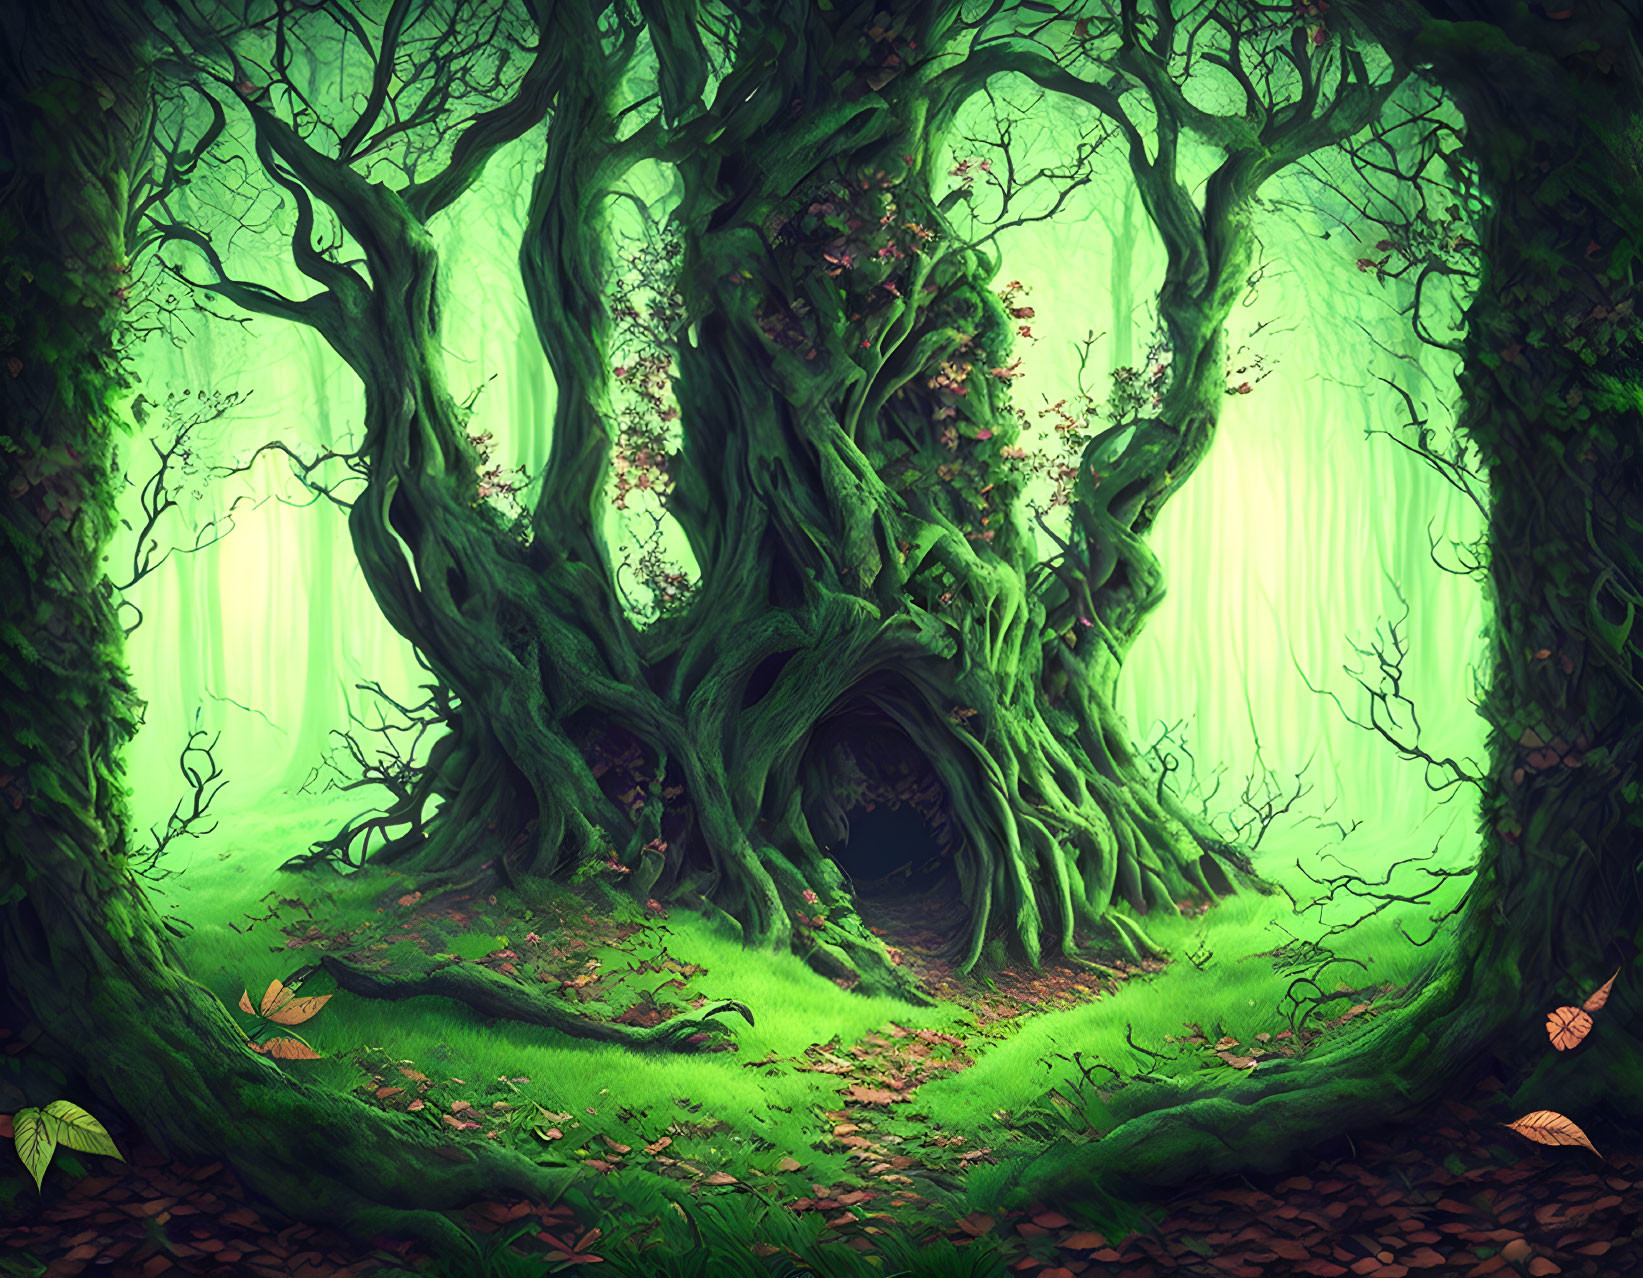 Enchanting forest scene with ancient twisted trees and vibrant green foliage